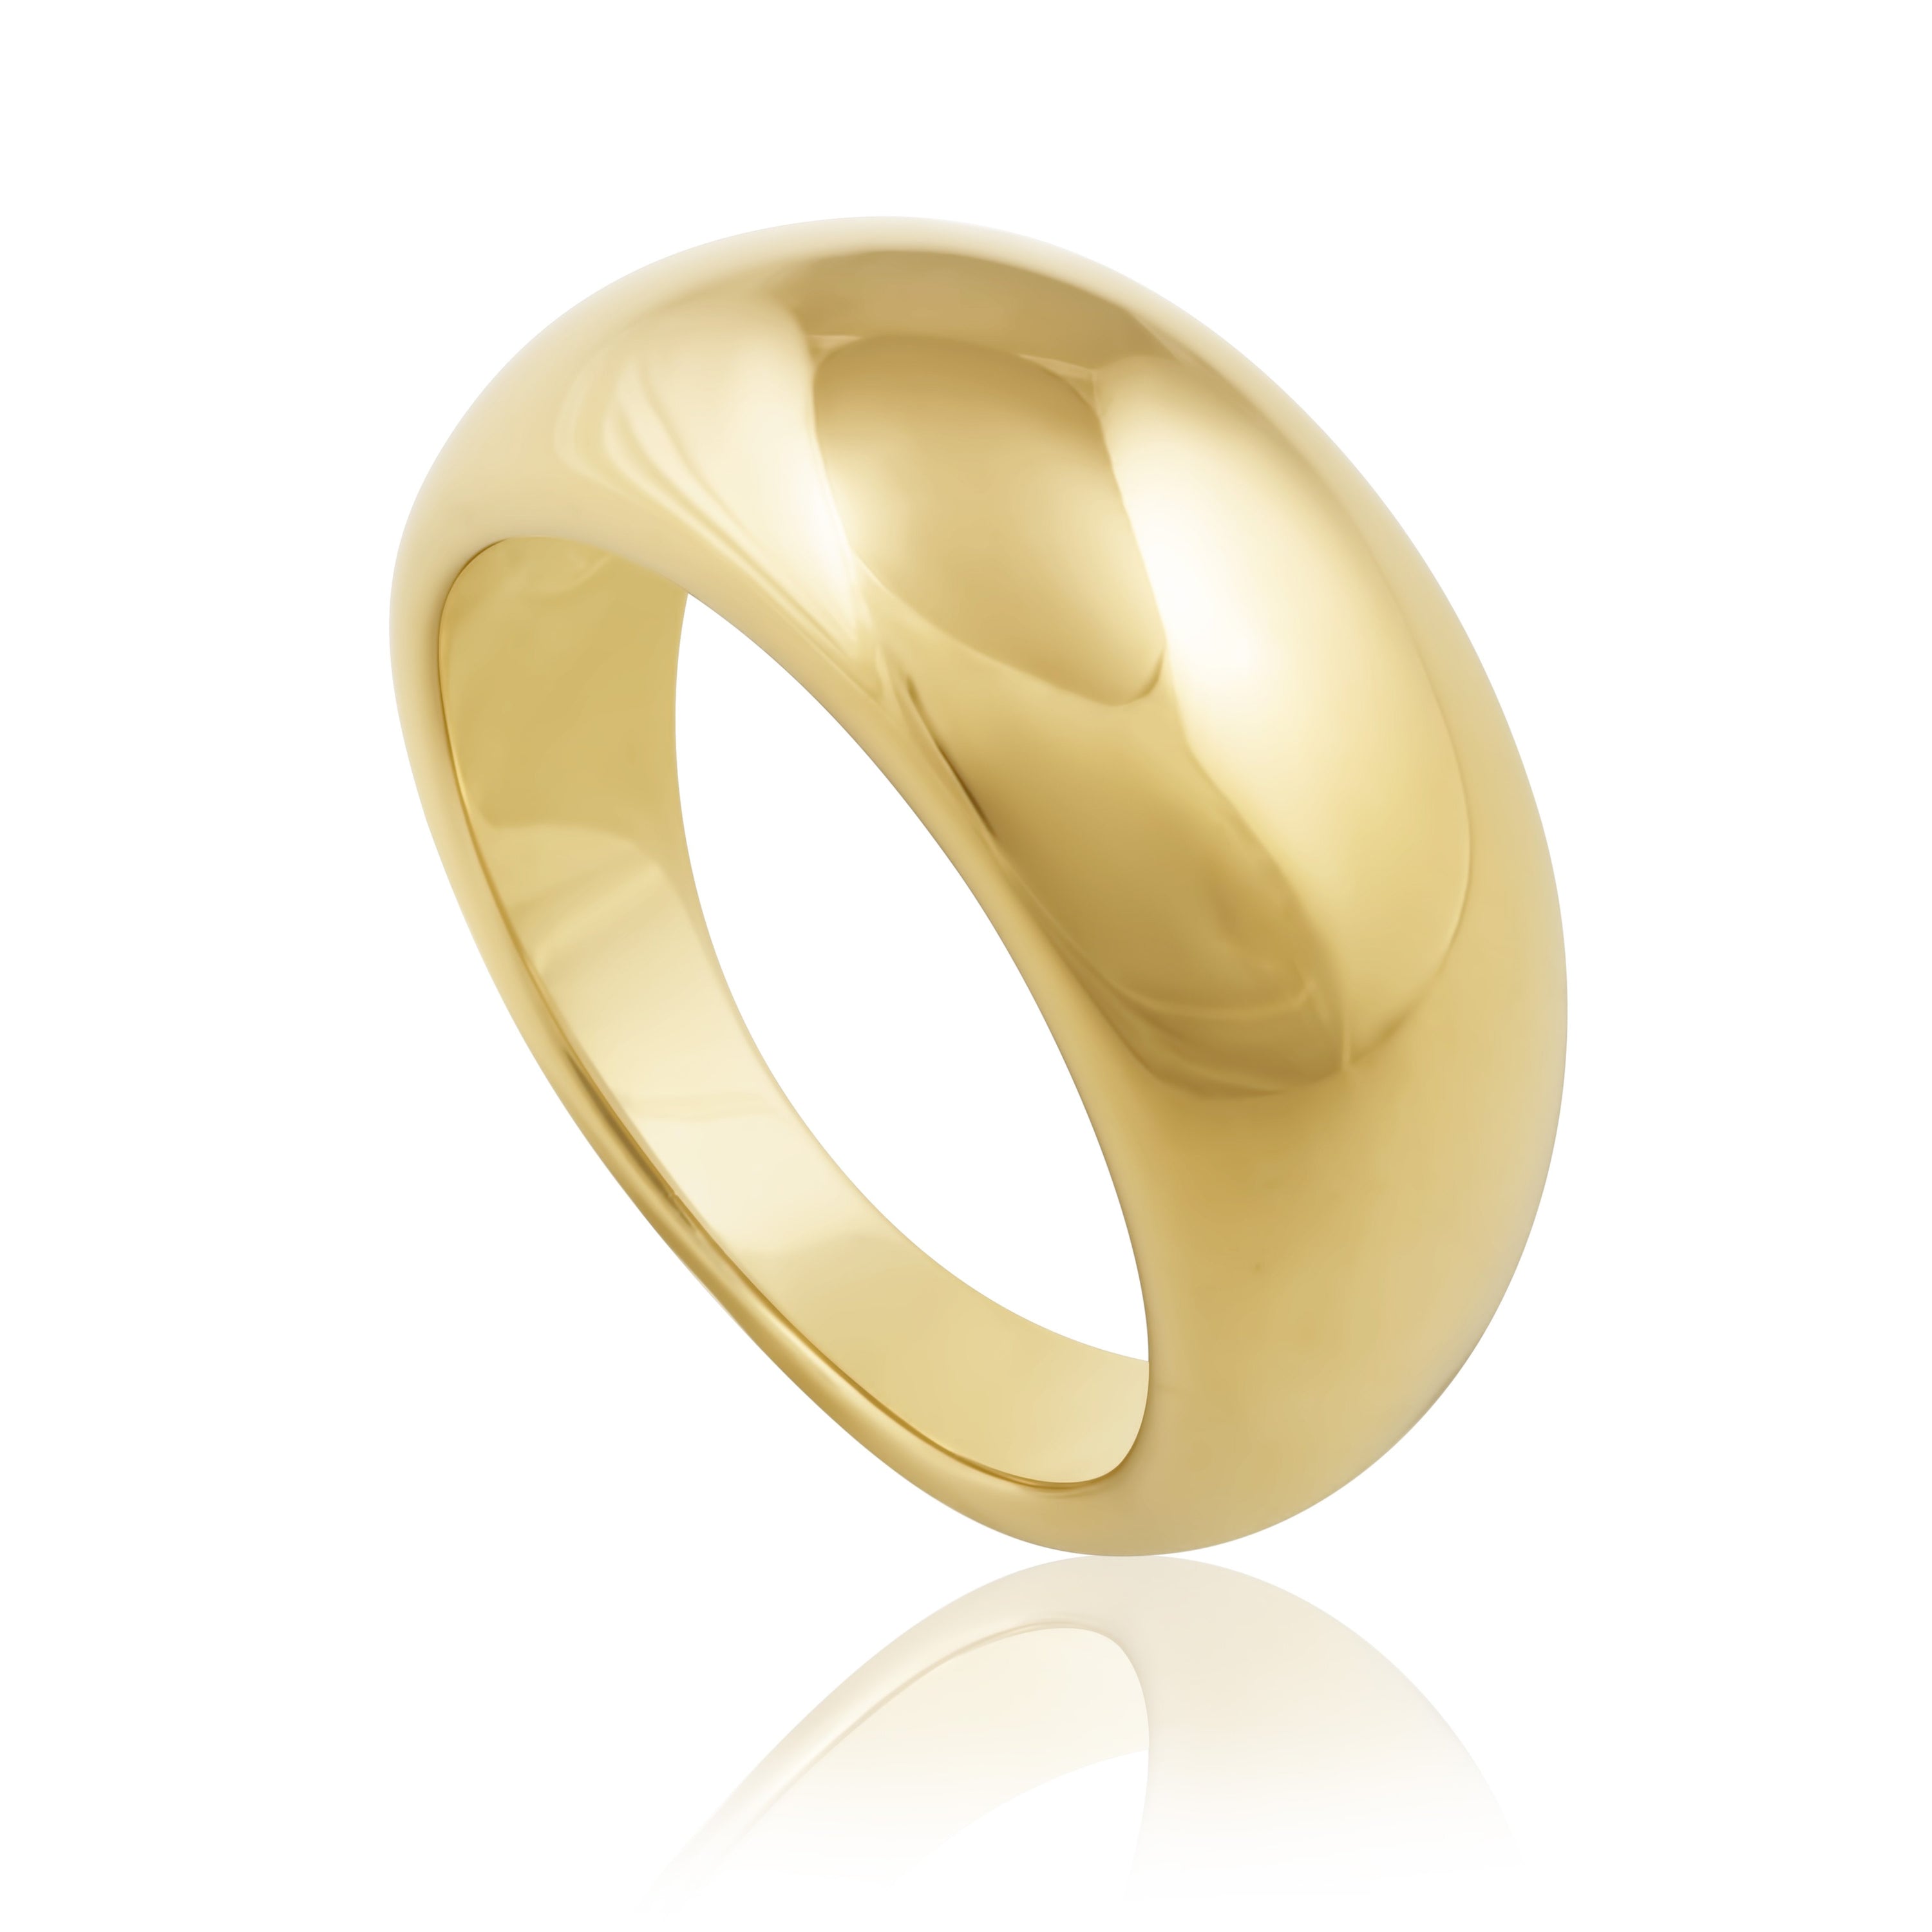 Gold Dome Ring - Sleek and Polished for Everyday Wear Bijou Her